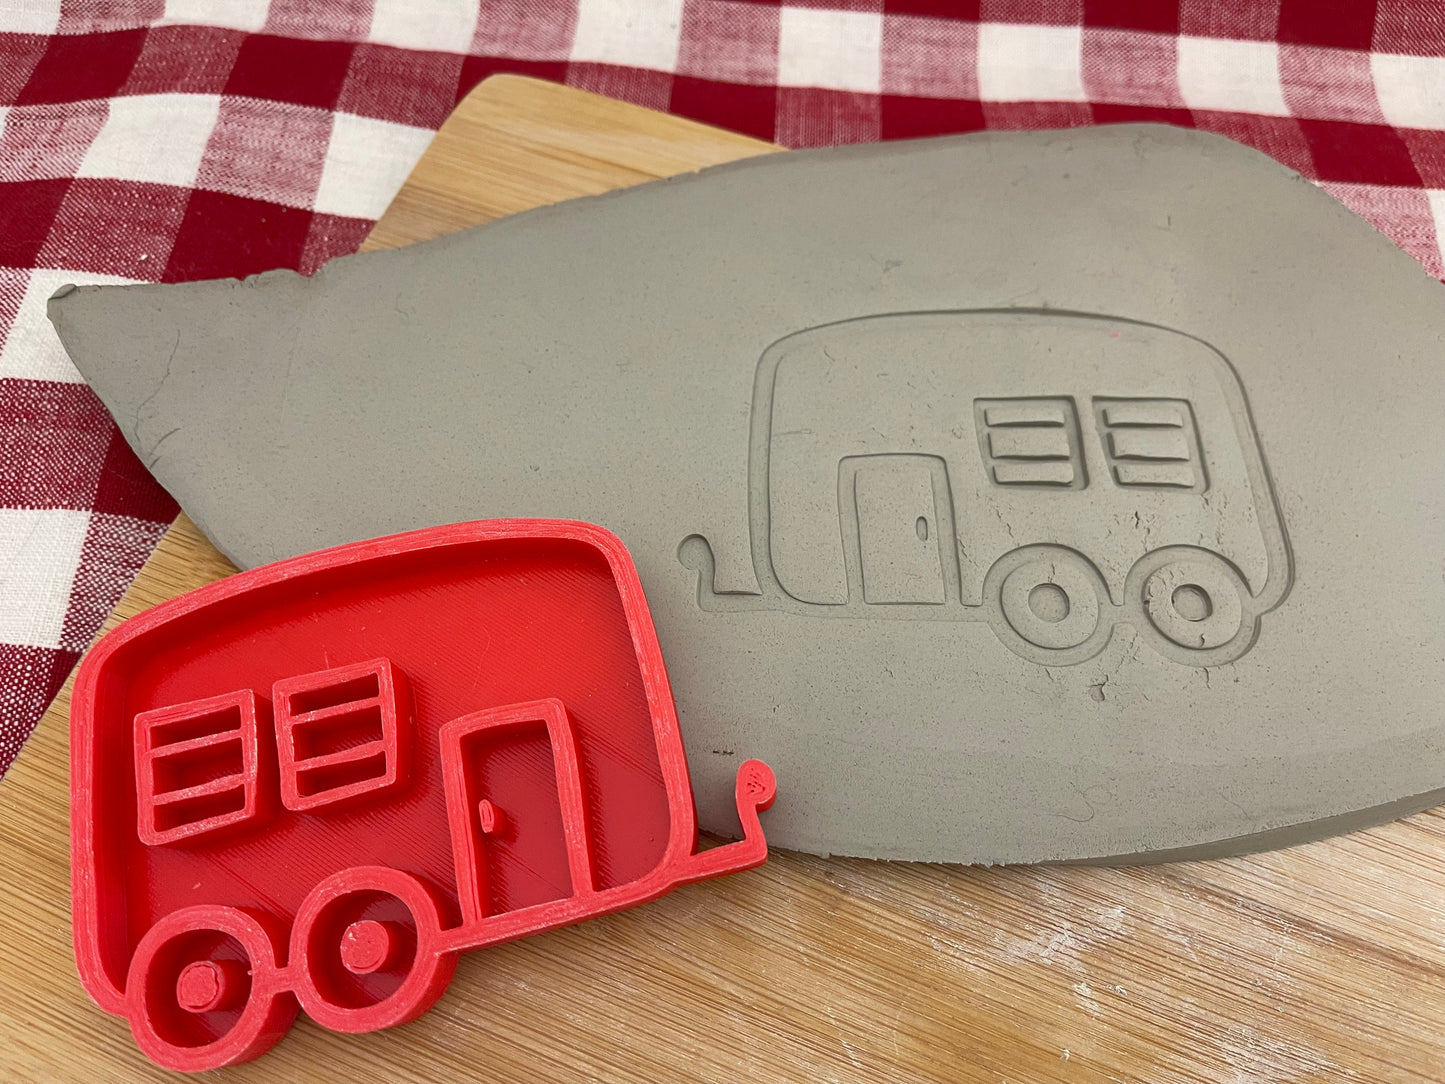 Camper pottery stamp, Camping doodle series - Pottery Tool, plastic 3d printed, multiple sizes available